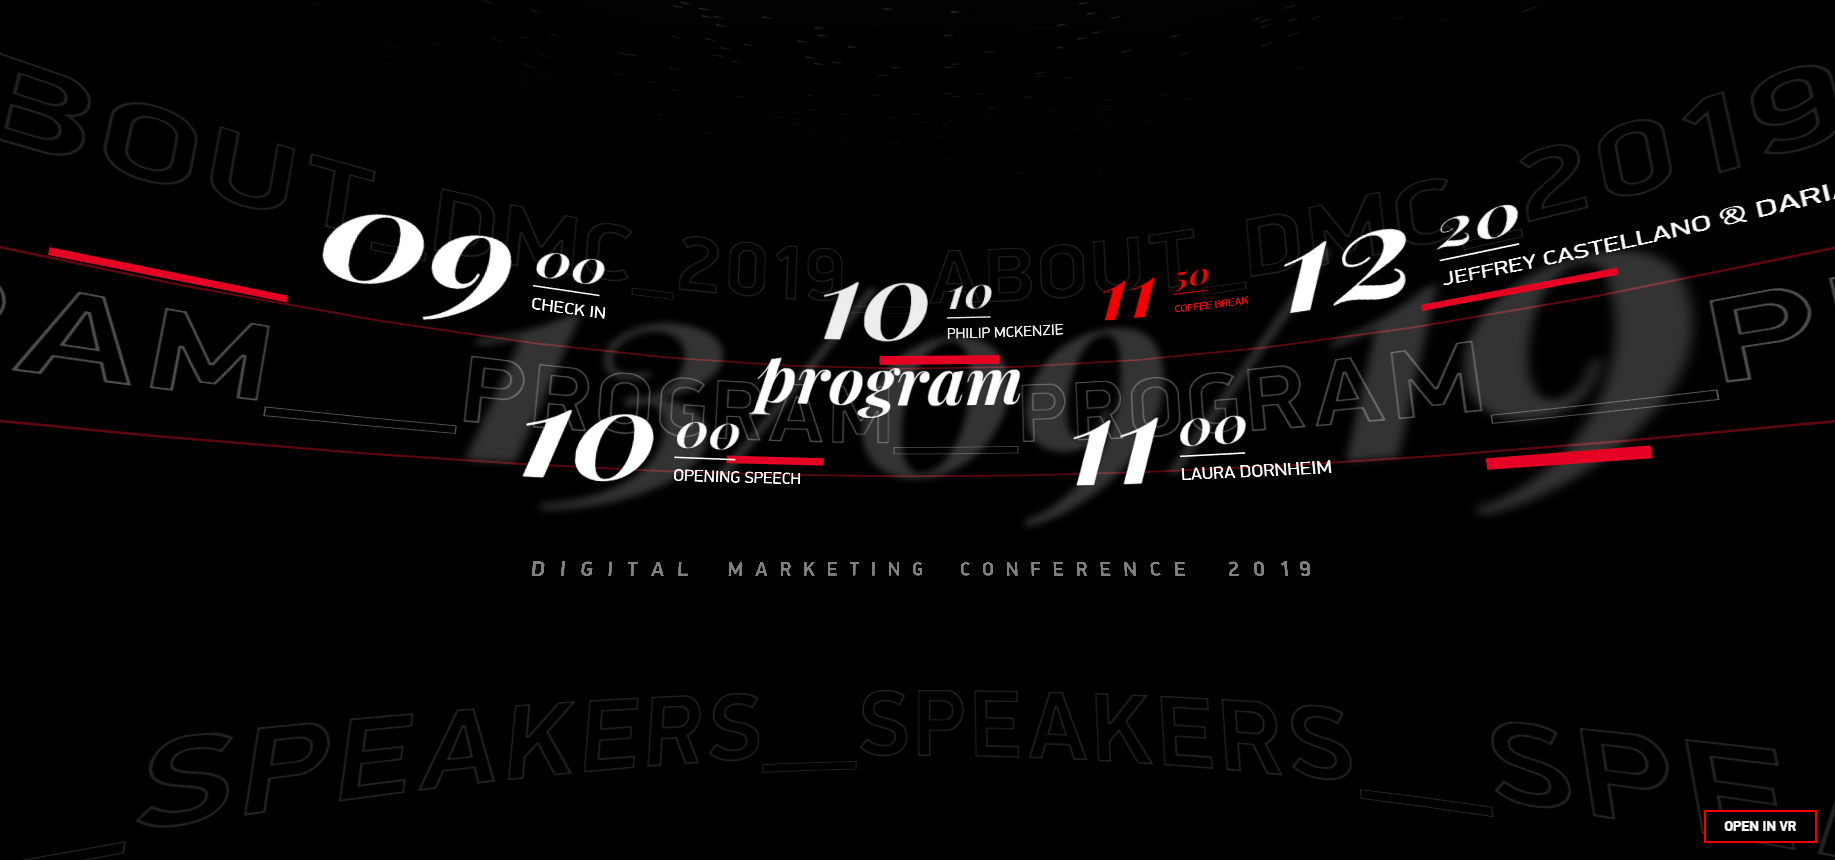 Digital Marketing Conference - Website of the Day